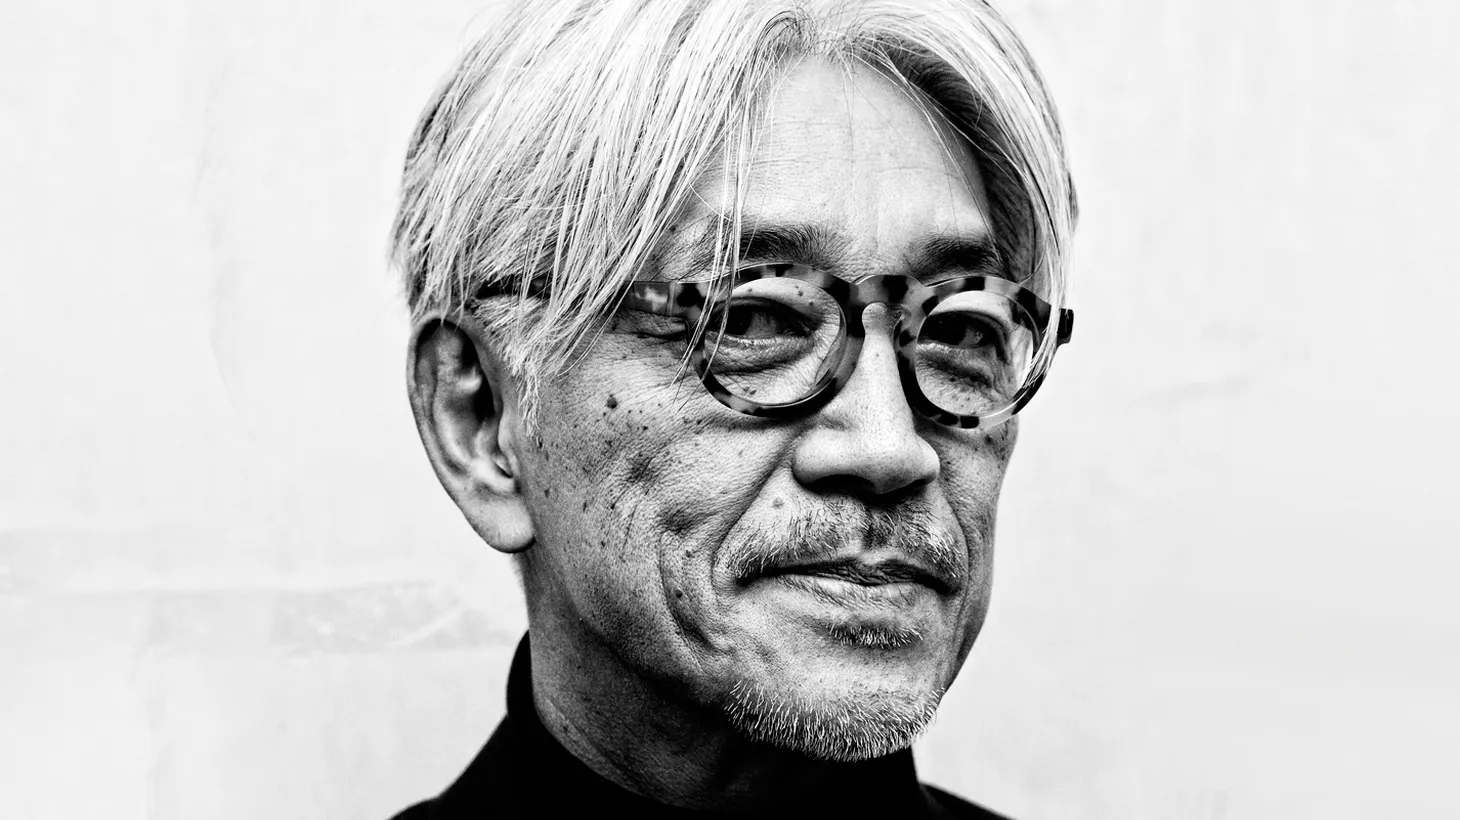 Ryuichi Sakamoto was a member of the electronic group Yellow Magic Orchestra in his native Tokyo, then became a solo artist, and wrote music for Hollywood films and the Olympics.